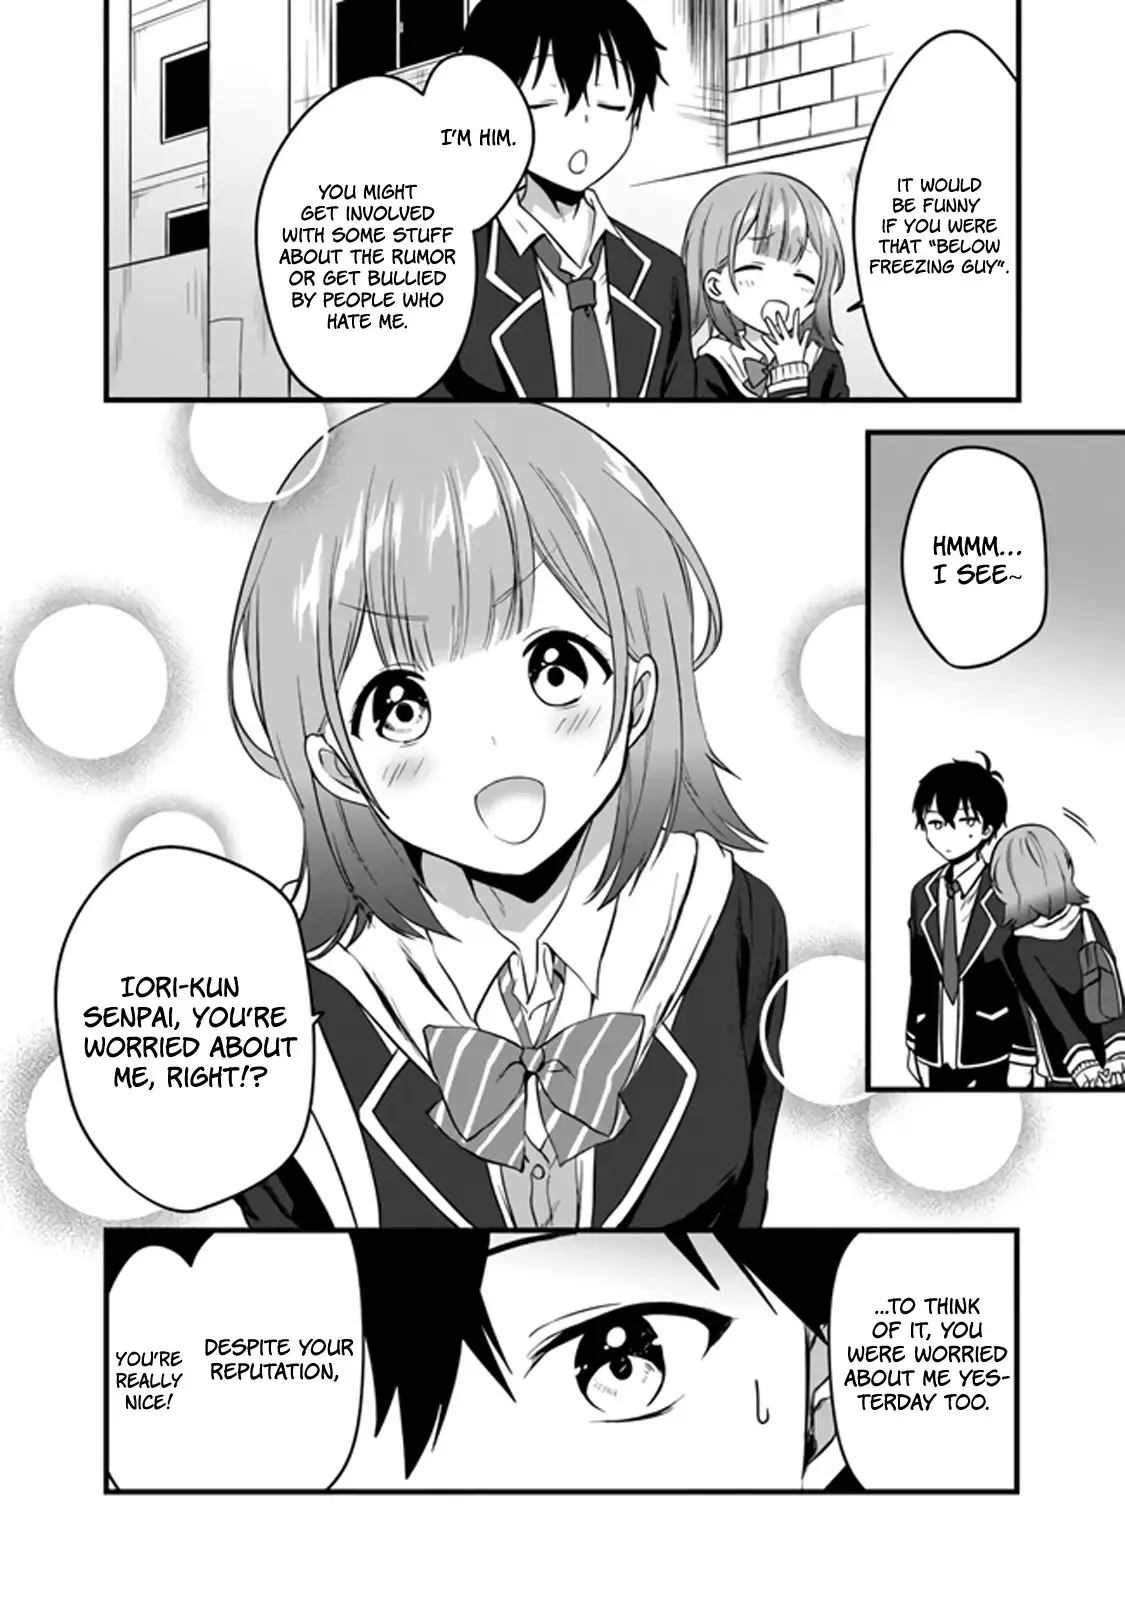 Right Now, She's Still My Childhood Friend's Sister. - 2 page 7